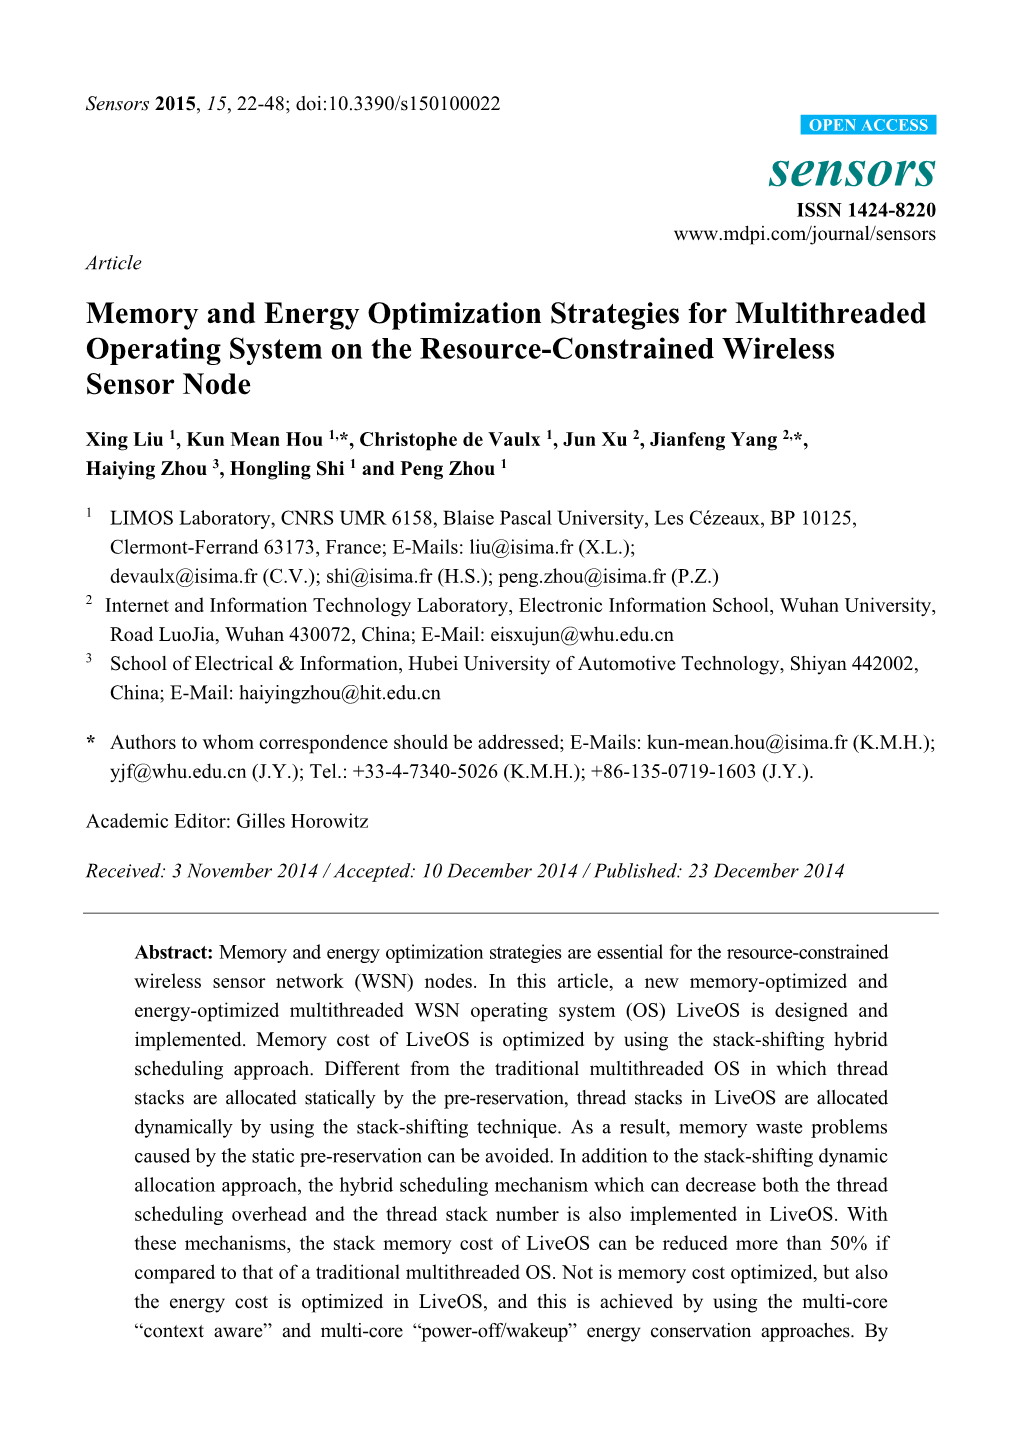 Memory and Energy Optimization Strategies for Multithreaded Operating System on the Resource-Constrained Wireless Sensor Node